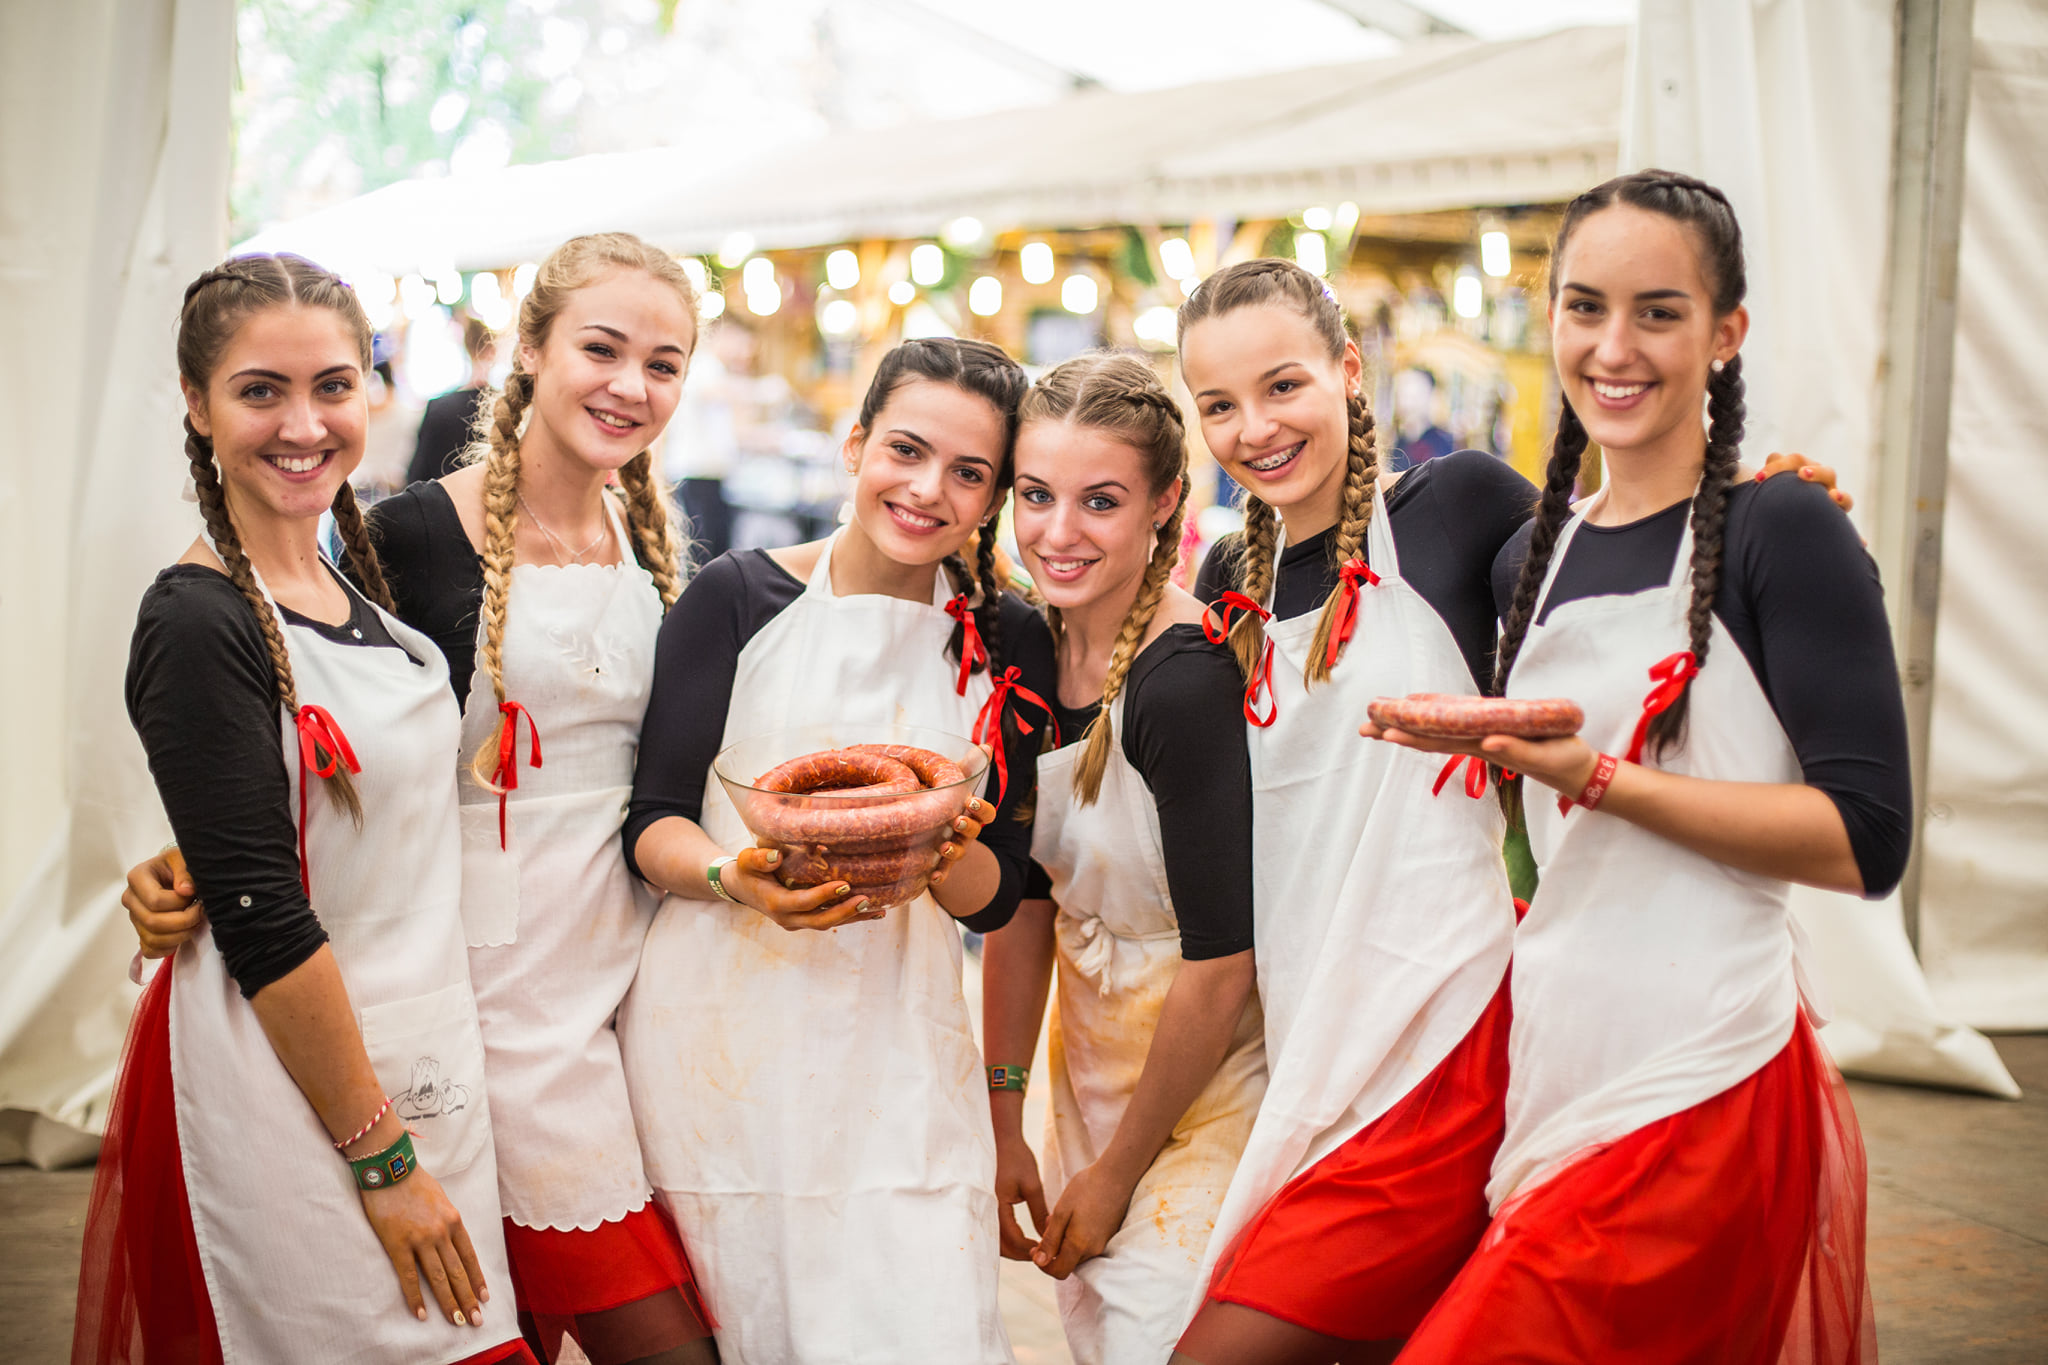 Csabai Sausage Festival 2nd best Autumn Food Festival in Europe! - PHOTOS,  VIDEO - Daily News Hungary